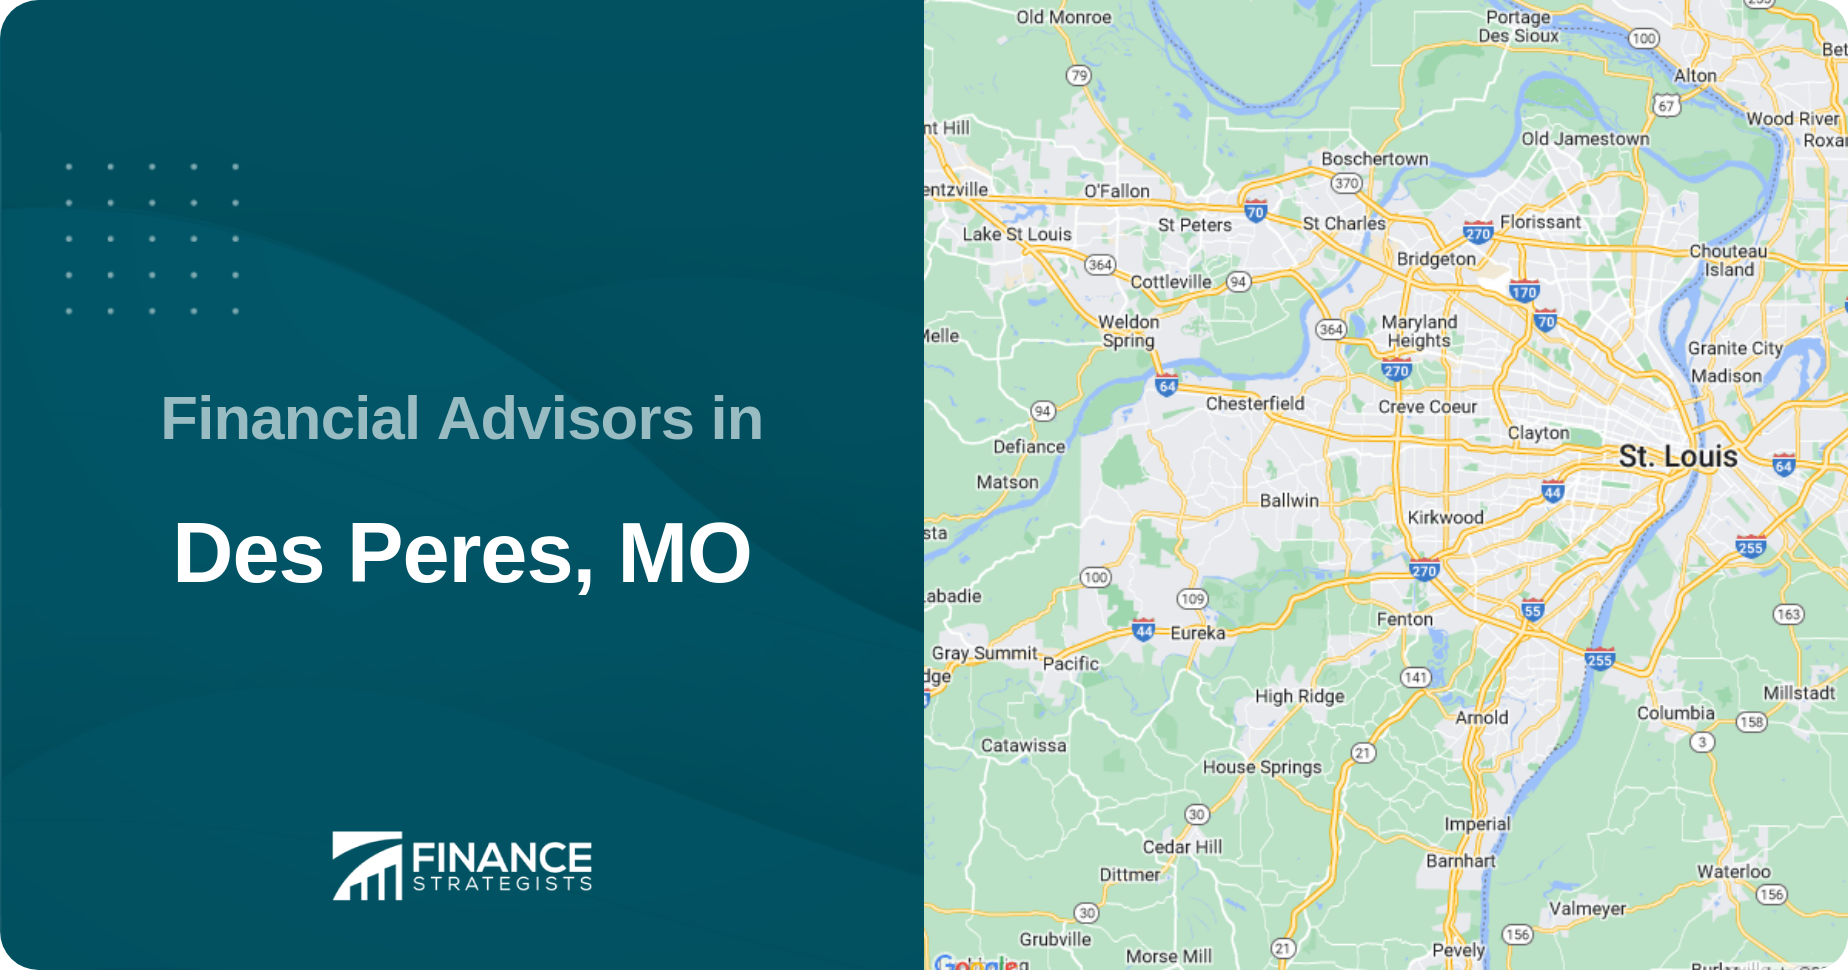 Financial Advisors in Des Peres, MO